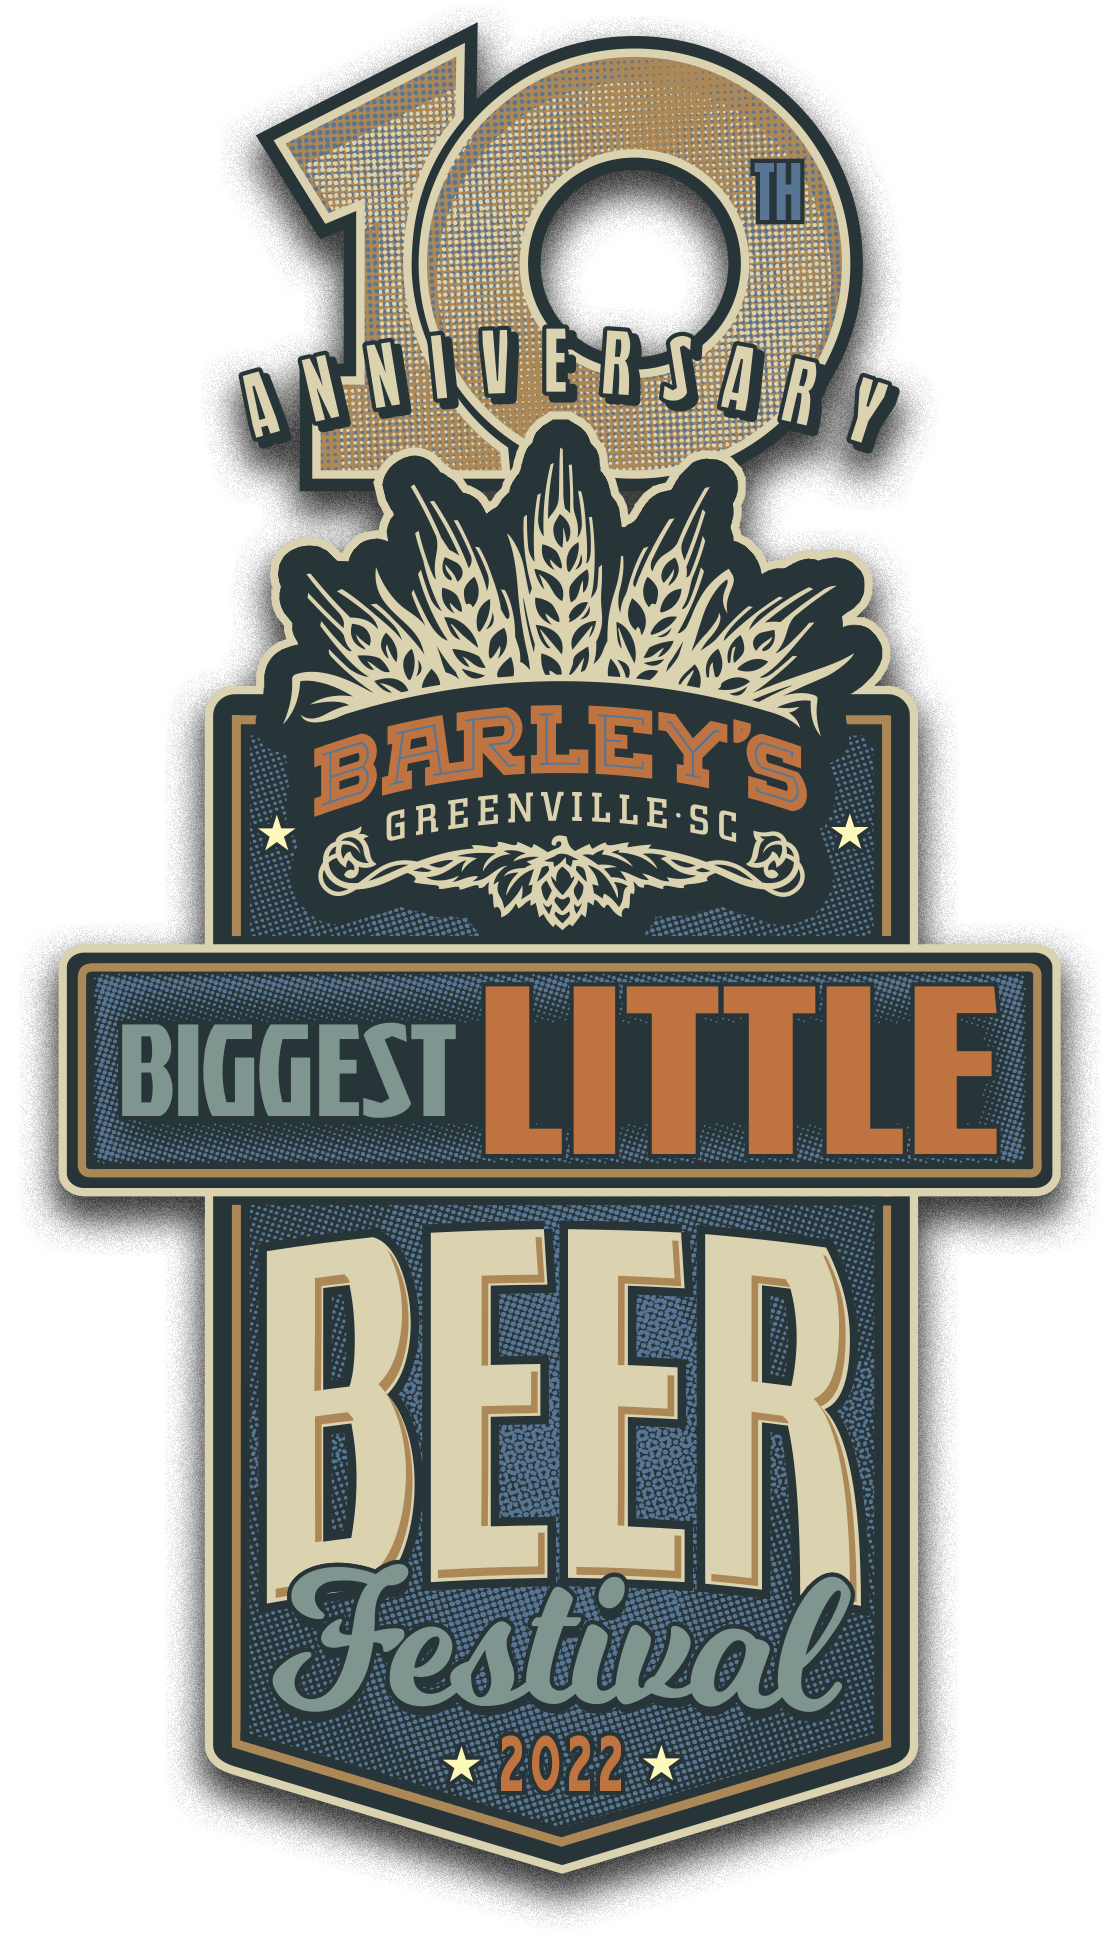 The Biggest Little Beerfest 2022